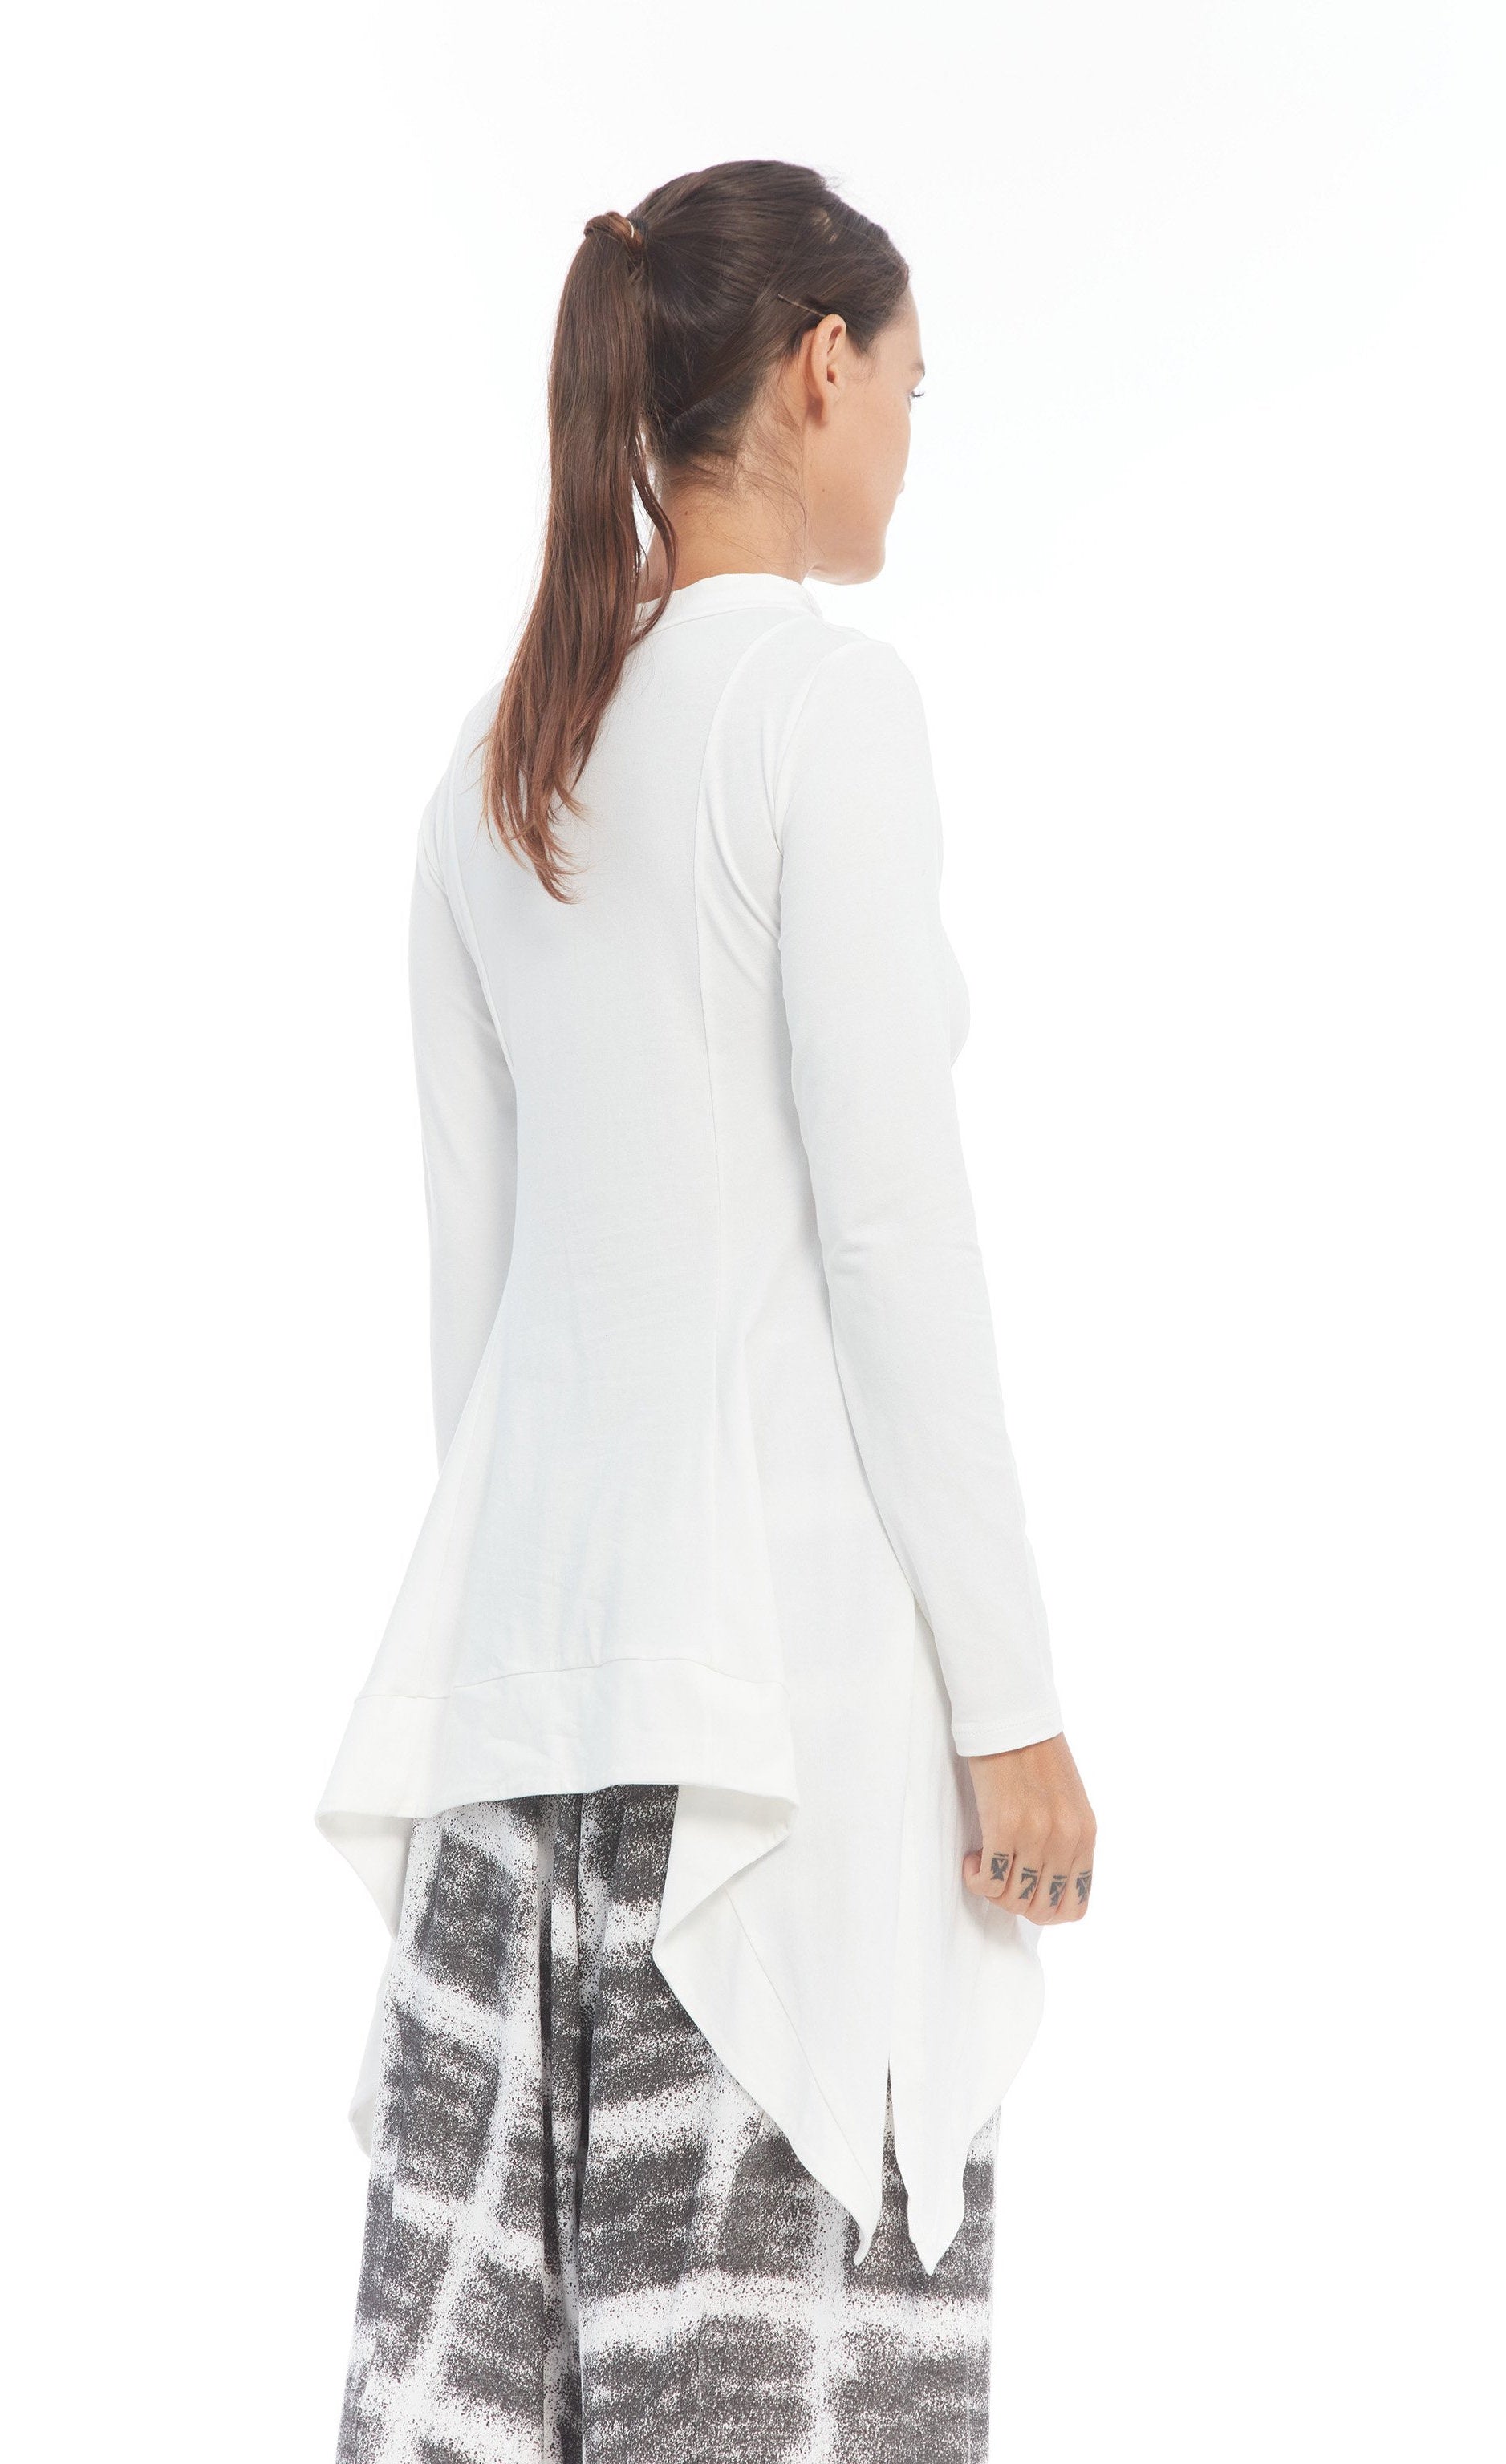 Back right side top half view of a woman wearing the mxmatthidlur lana top in white. This top has long sleeves, longer sides, and a high boat neck.